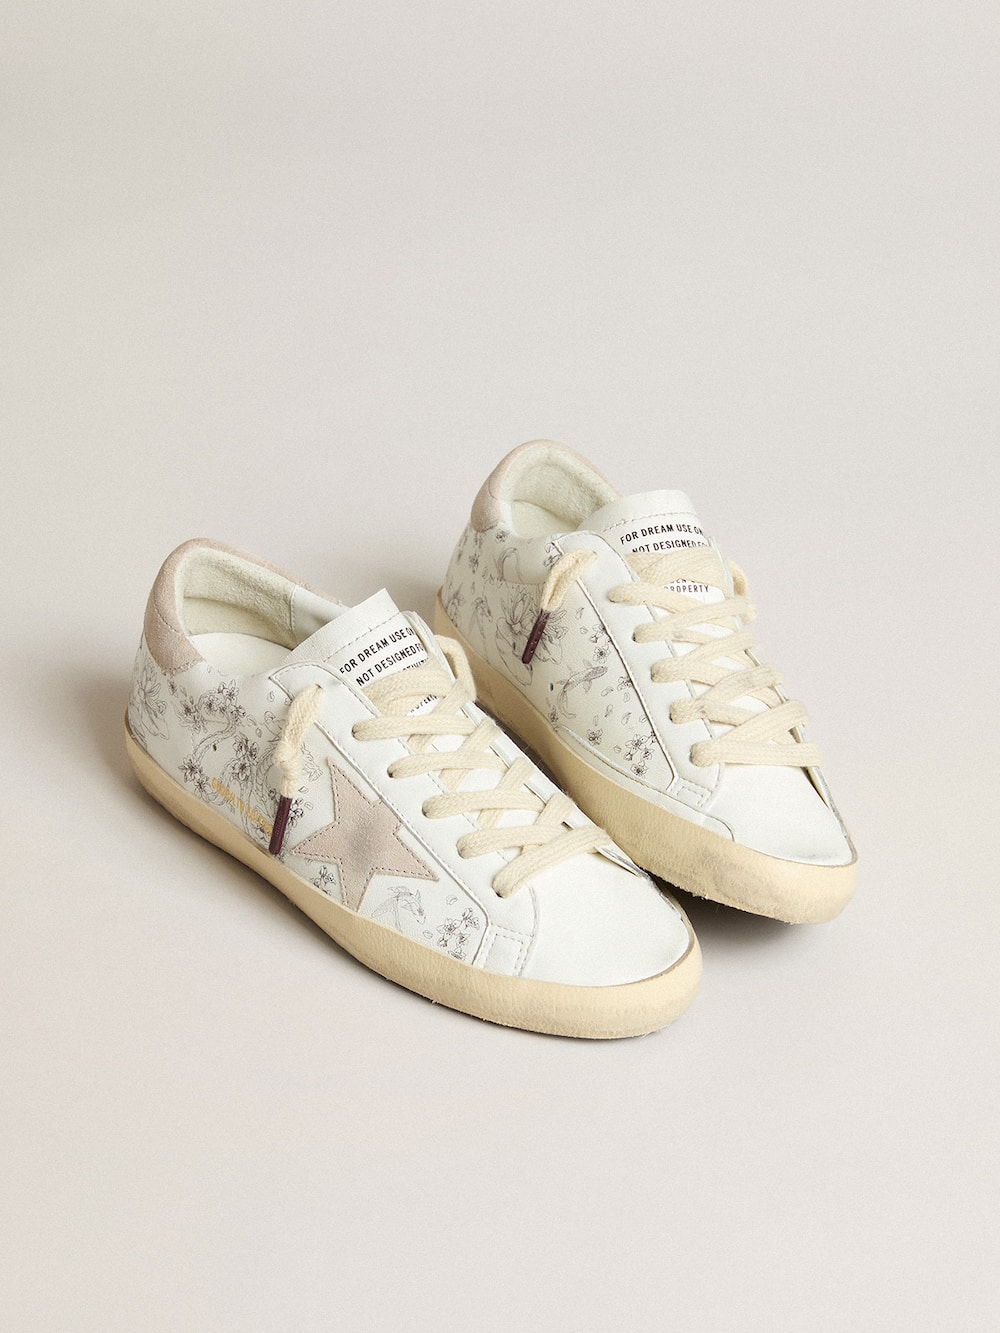 Golden Goose - Men’s Super-Star LTD CNY in white leather with lettering on the upper in 